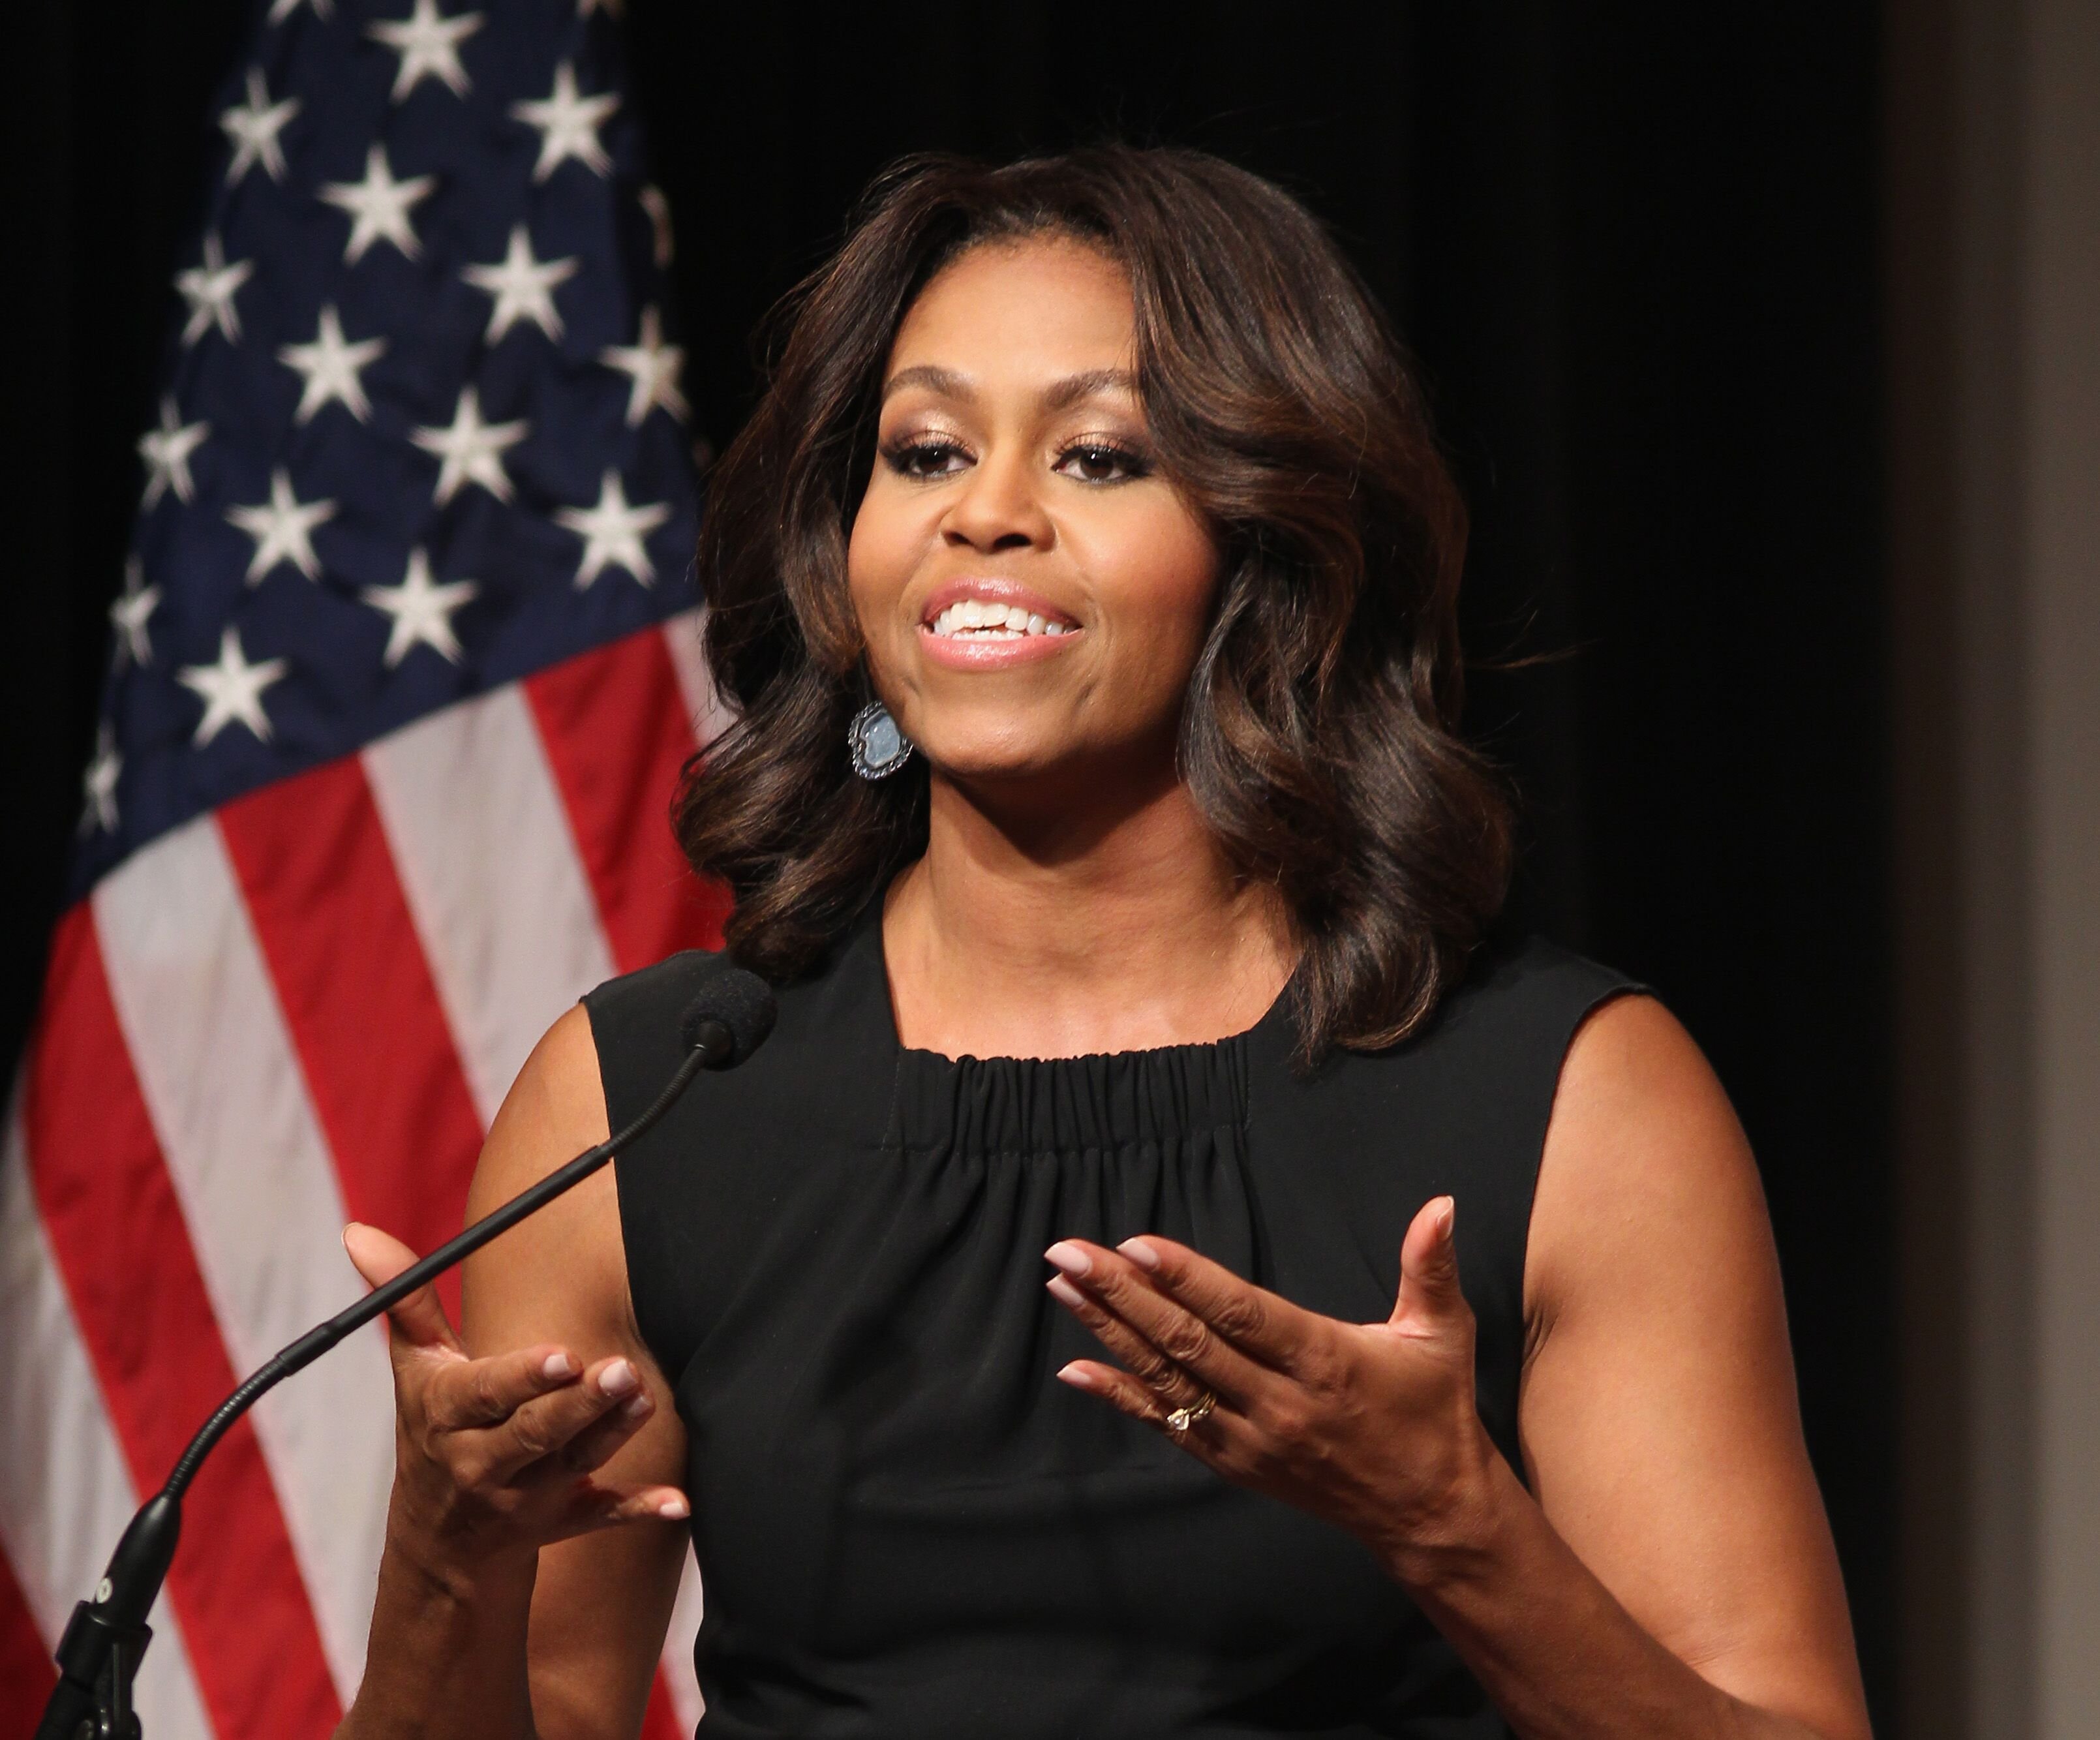  First Lady of the United States Michelle Obama speaks on stage at the Women Veterans Career Development Forum at Women in Military Service for America Memorial on November 10, 2014 in Arlington, Virginia. | Photo: Getty Images